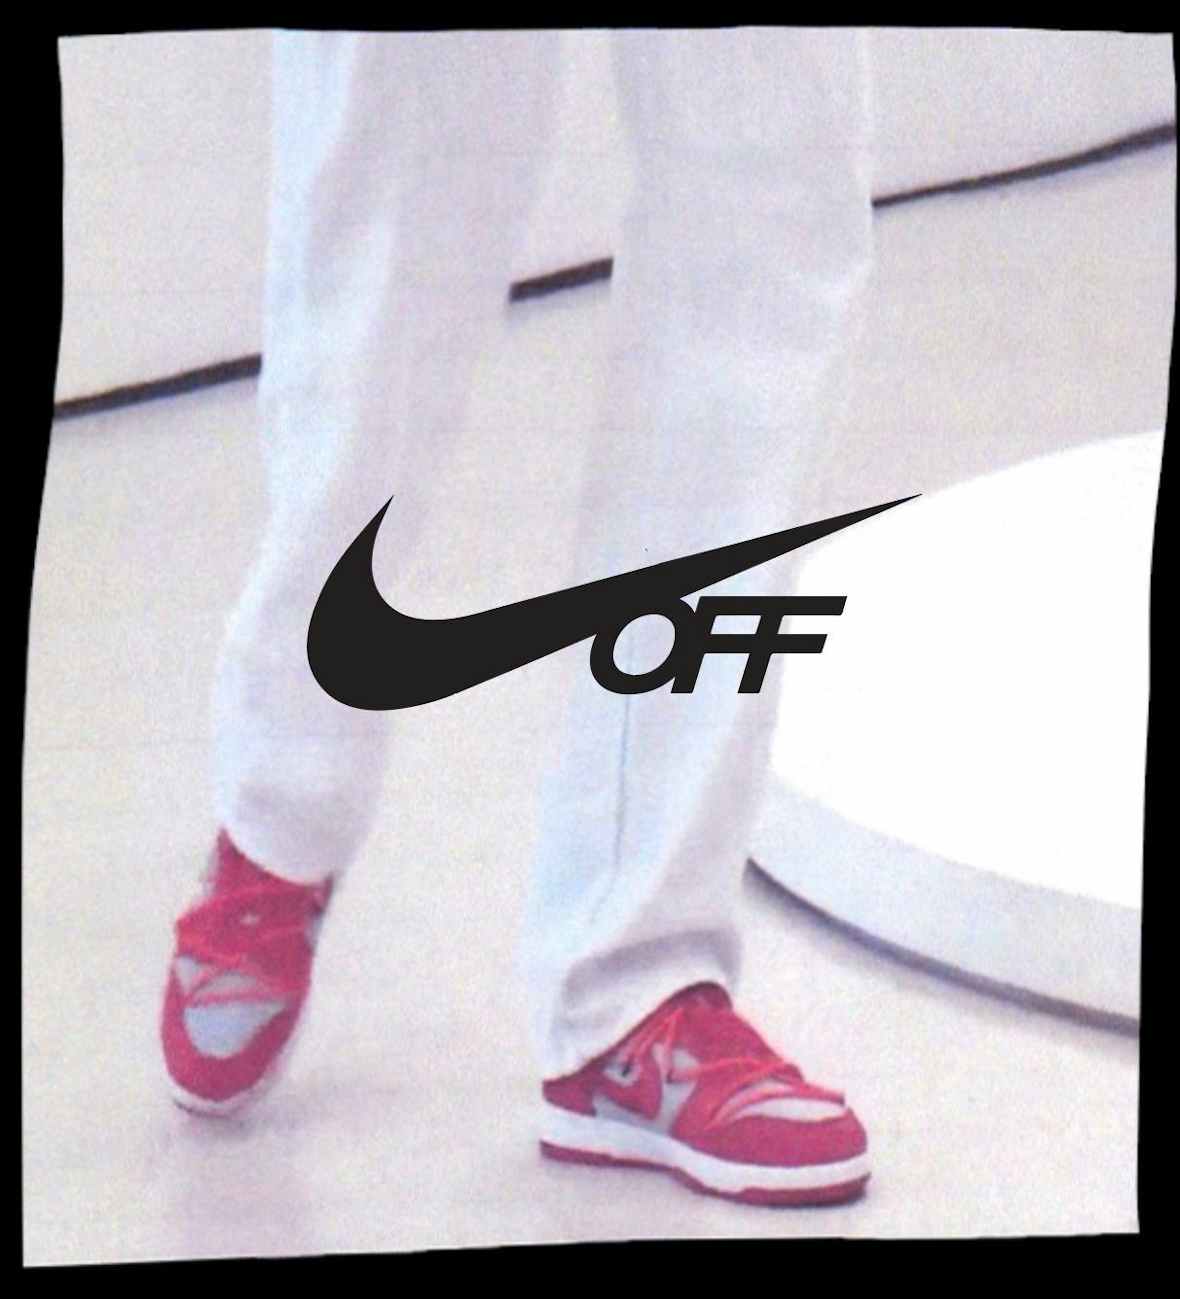 Off-White x Nike: The History Behind Virgil Abloh's Sneaker